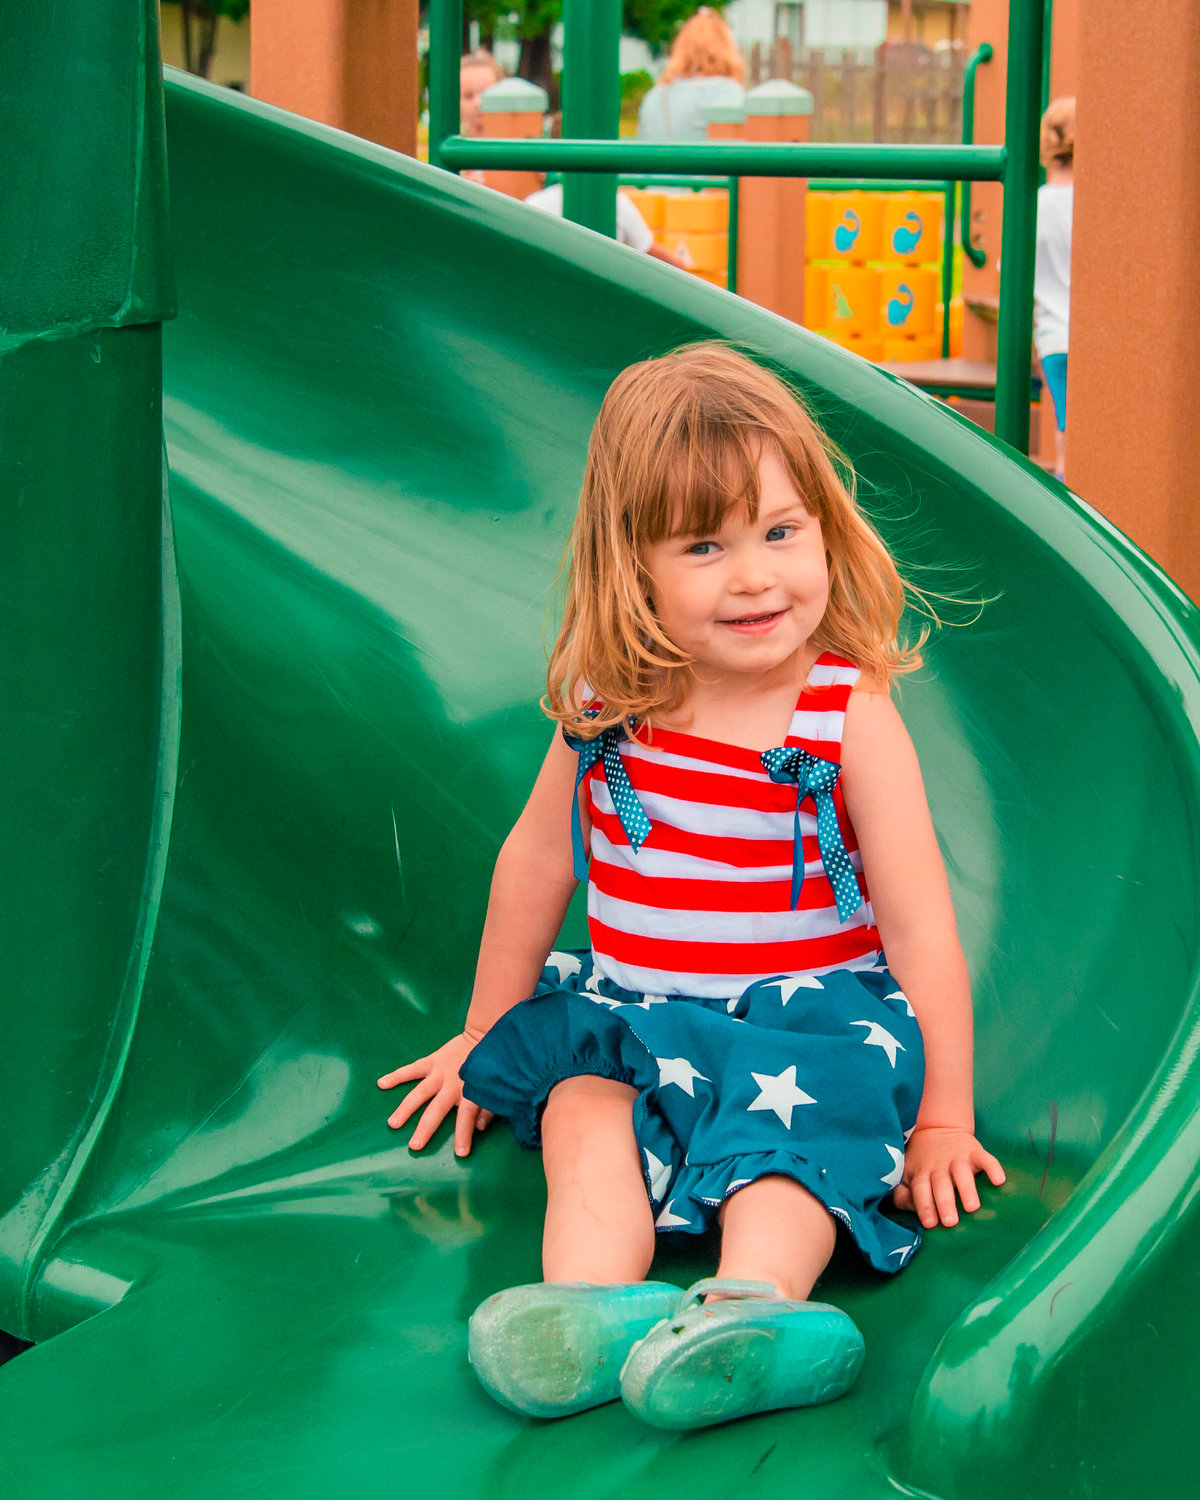 Charlie Grant, 2, smiles as she comes down a slide in Klickitat Prairie Park sporting an American Flag-styled dress Saturday during celebrations for the Mossyrock Freedom Festival.